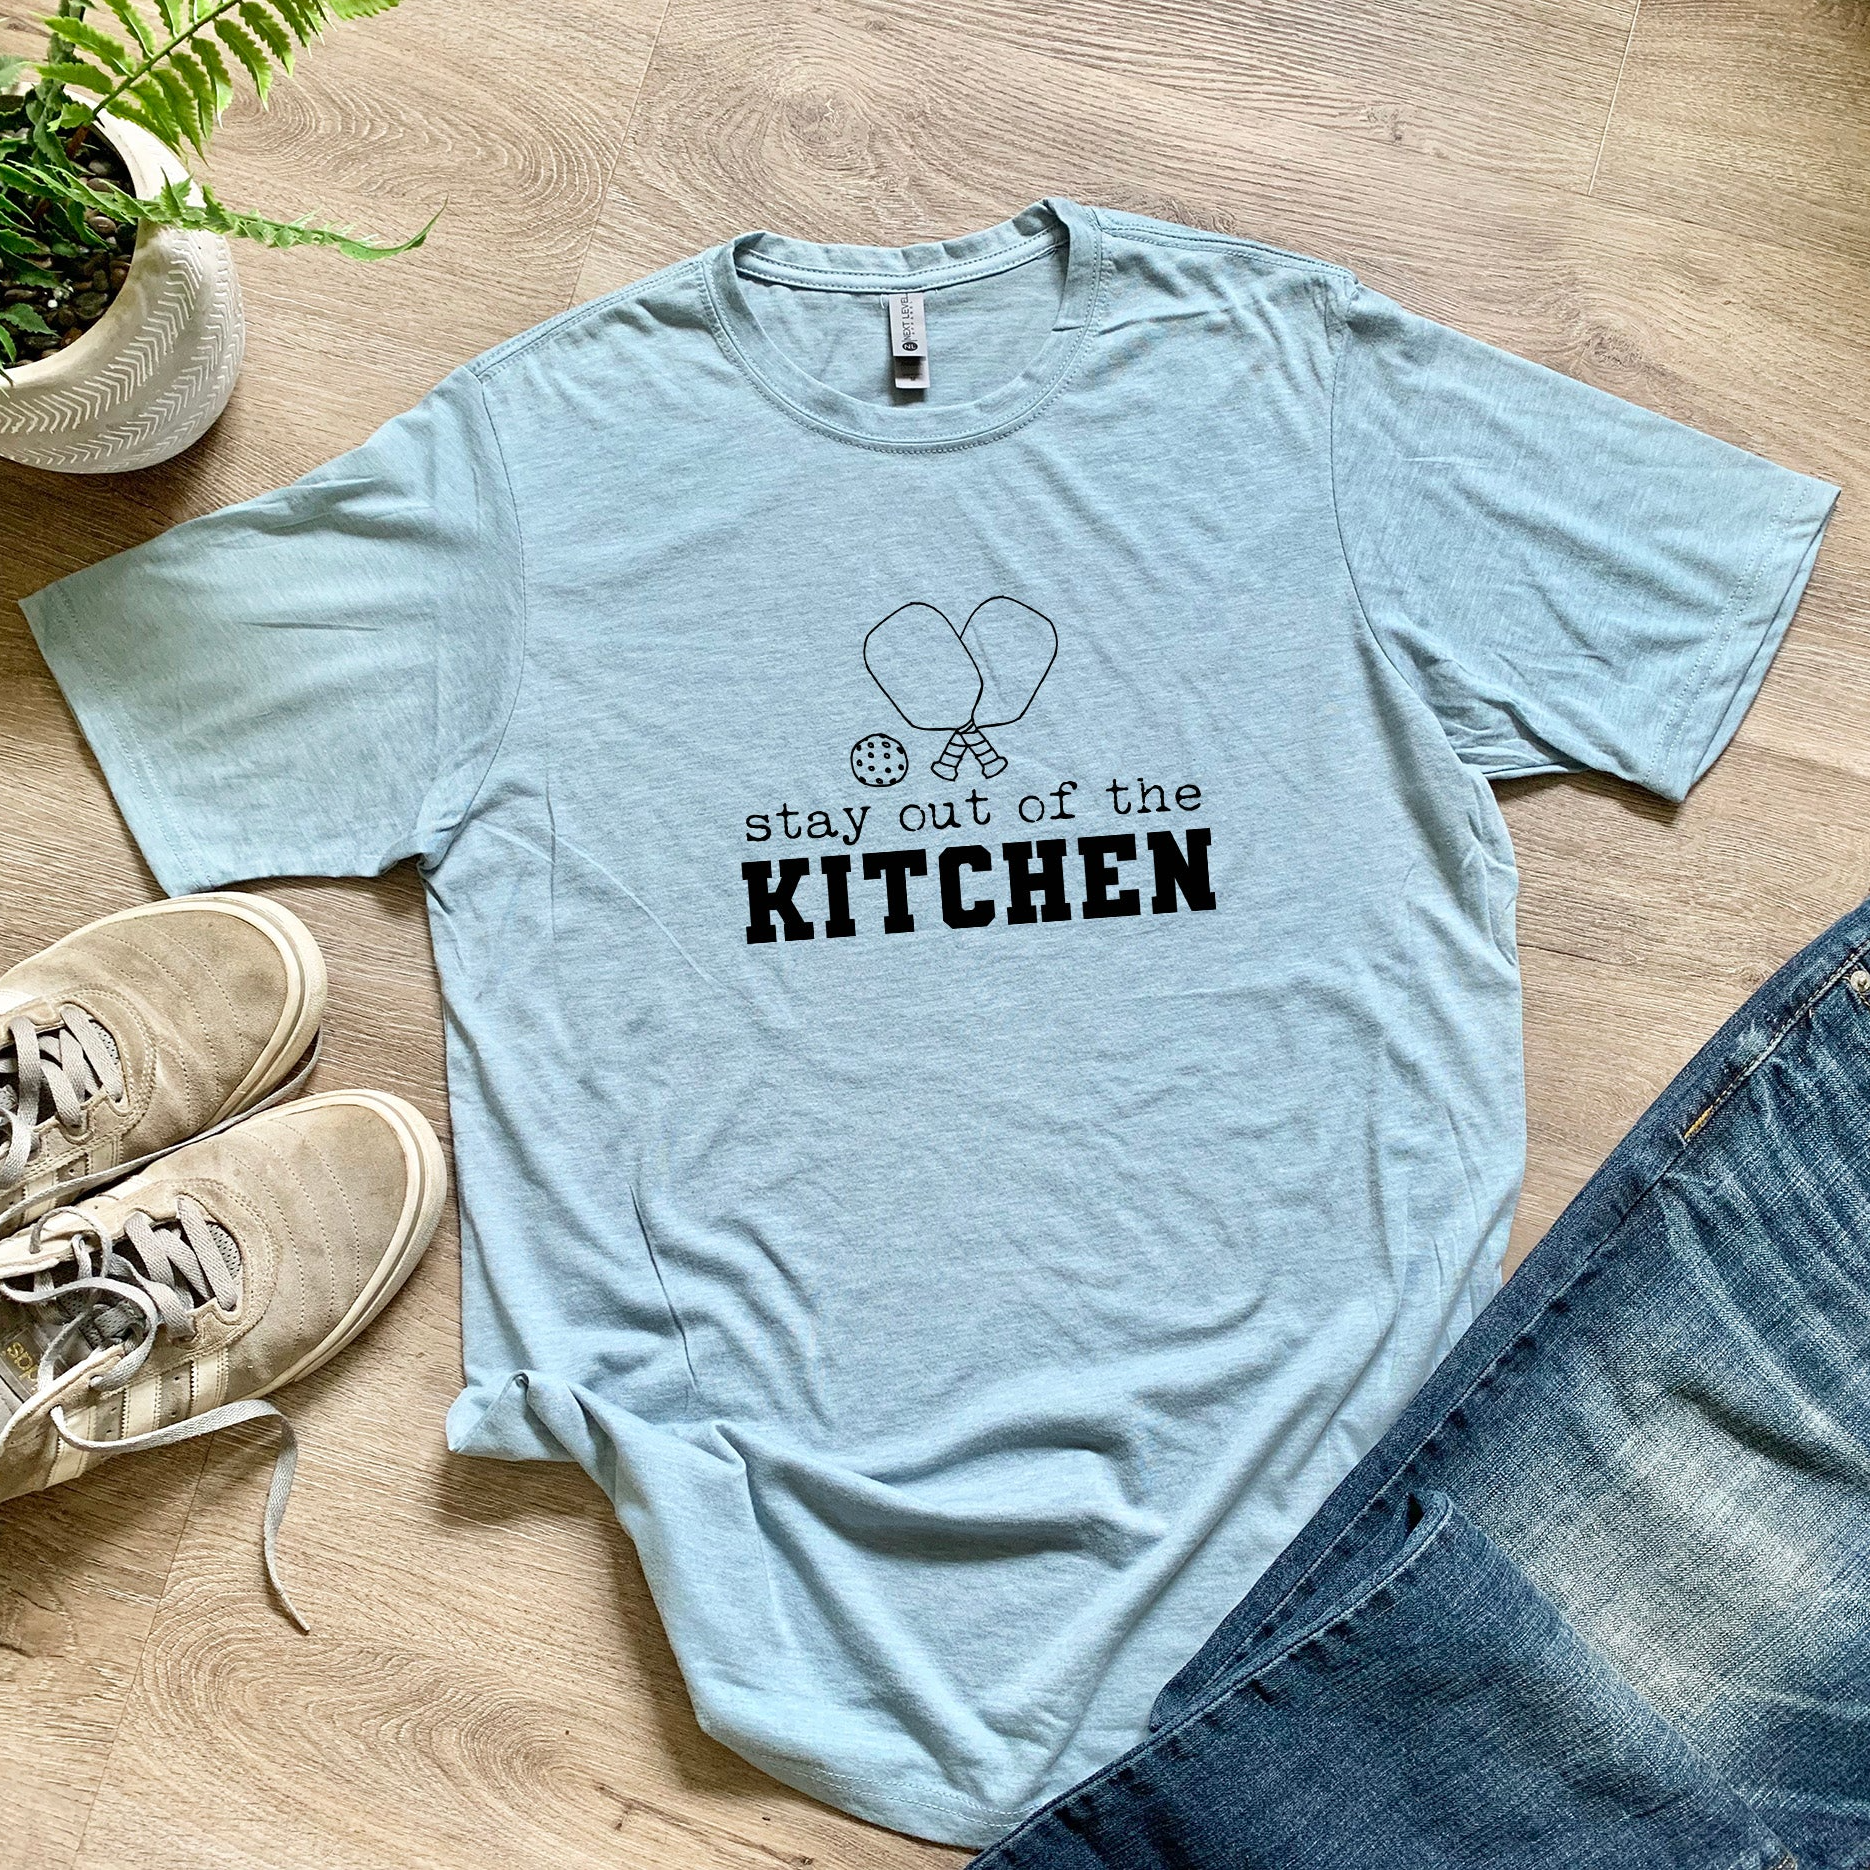 a t - shirt that says stay out of the kitchen next to a pair of